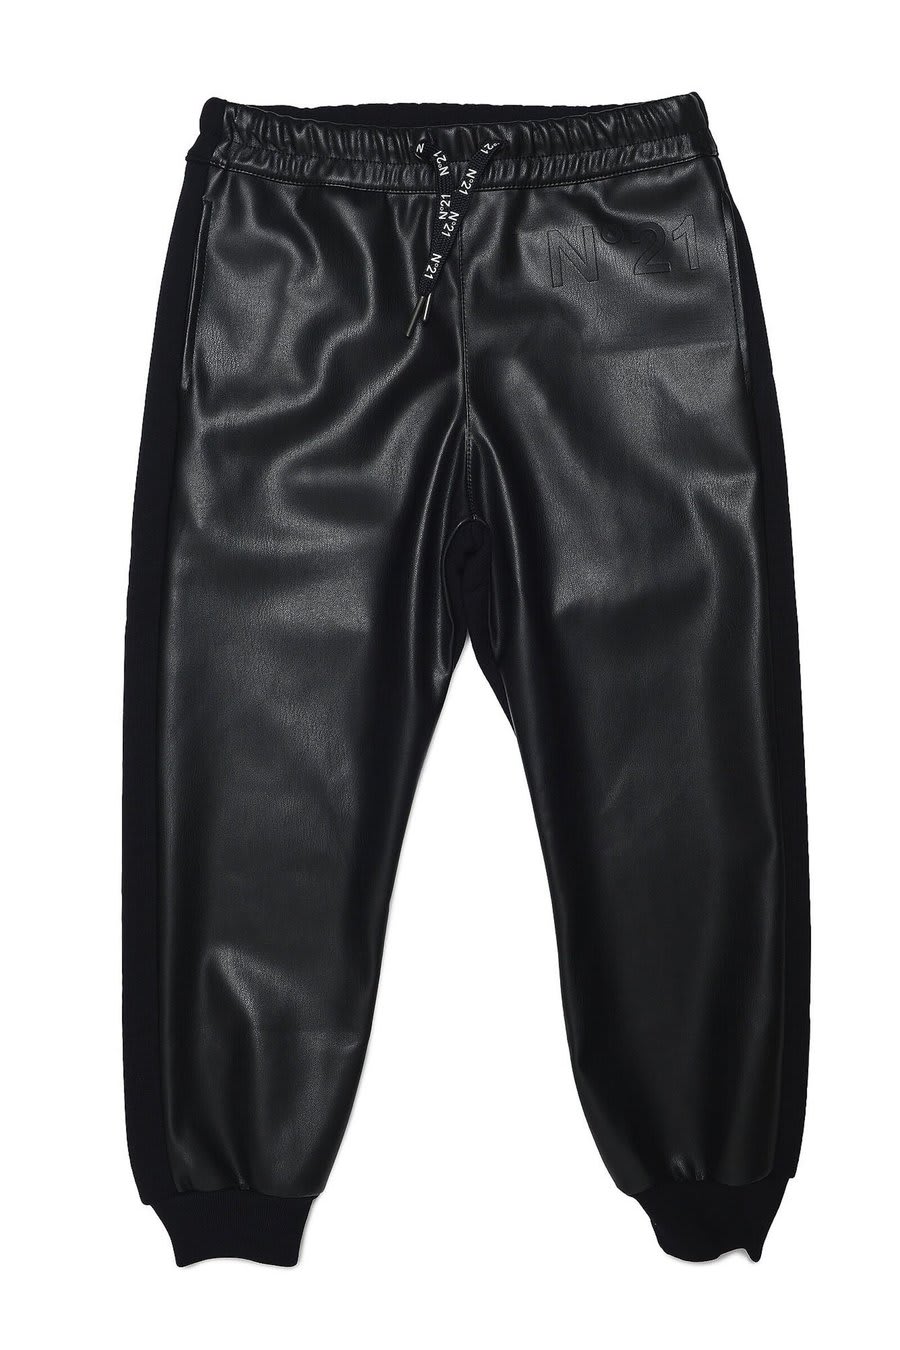 N.21 Sports Trousers With Contrasting Panel